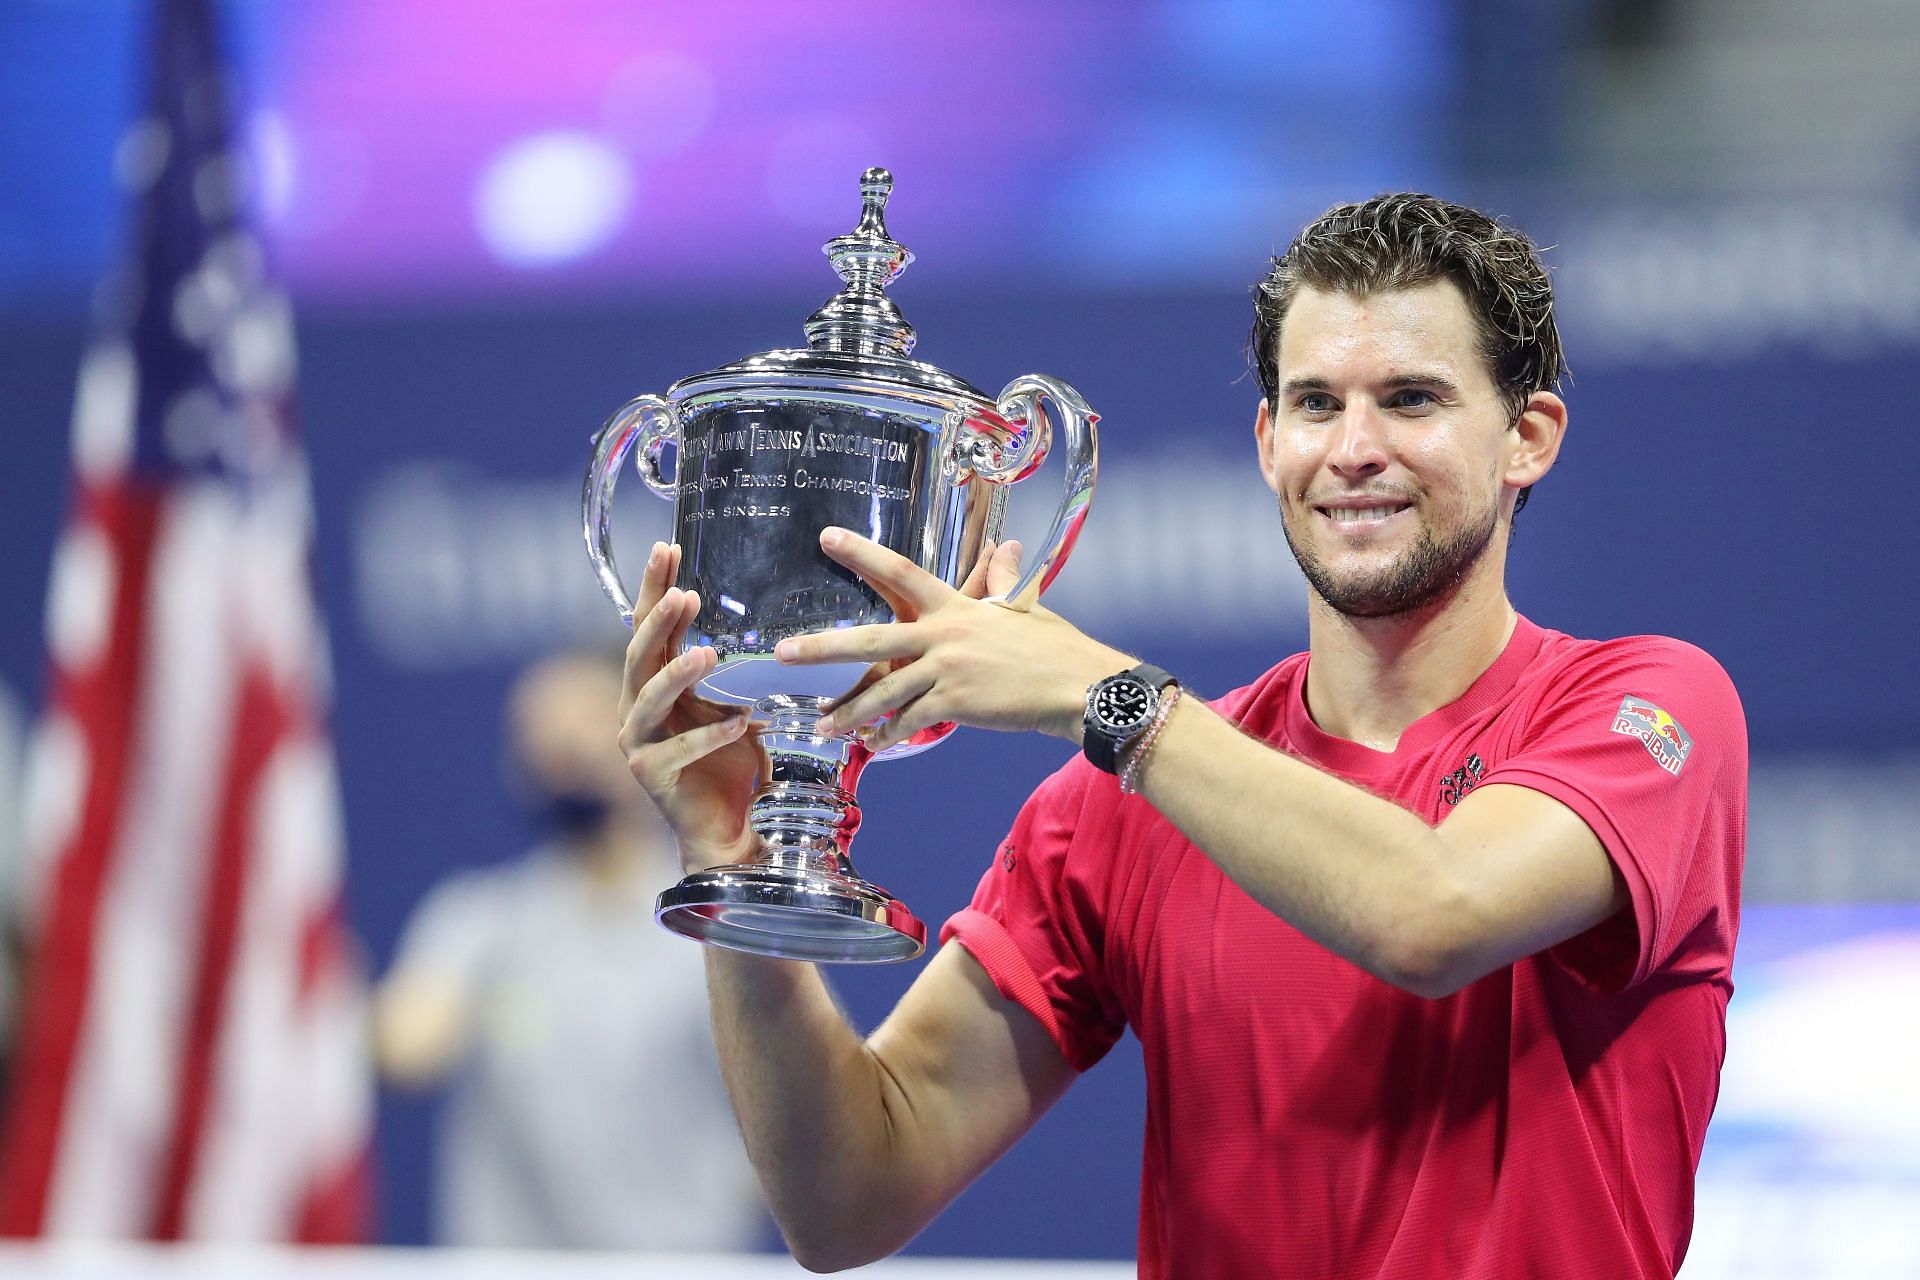 Dominic Thiem became a Major winner at Flushing Meadows in 2020.